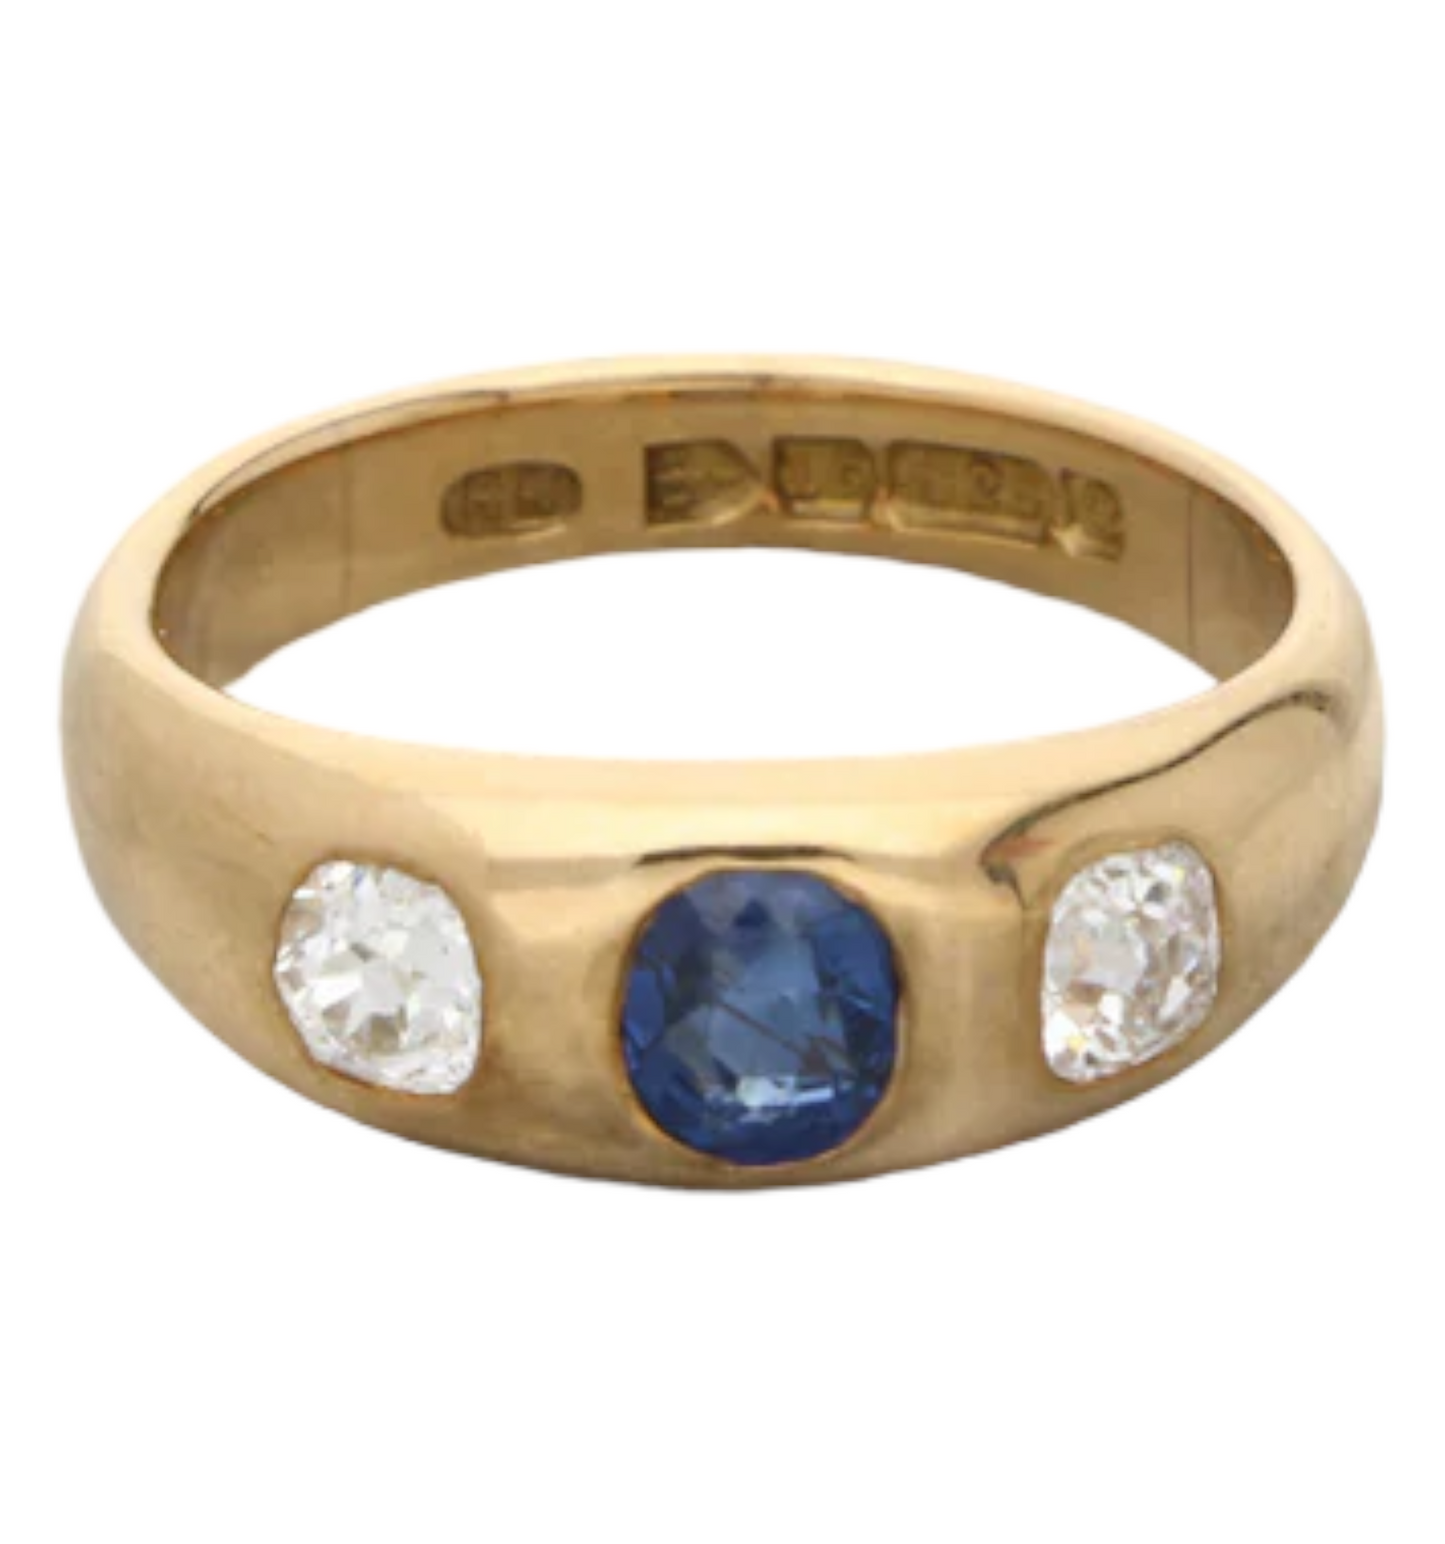 Antique 15ct sapphire and old cut diamond ring